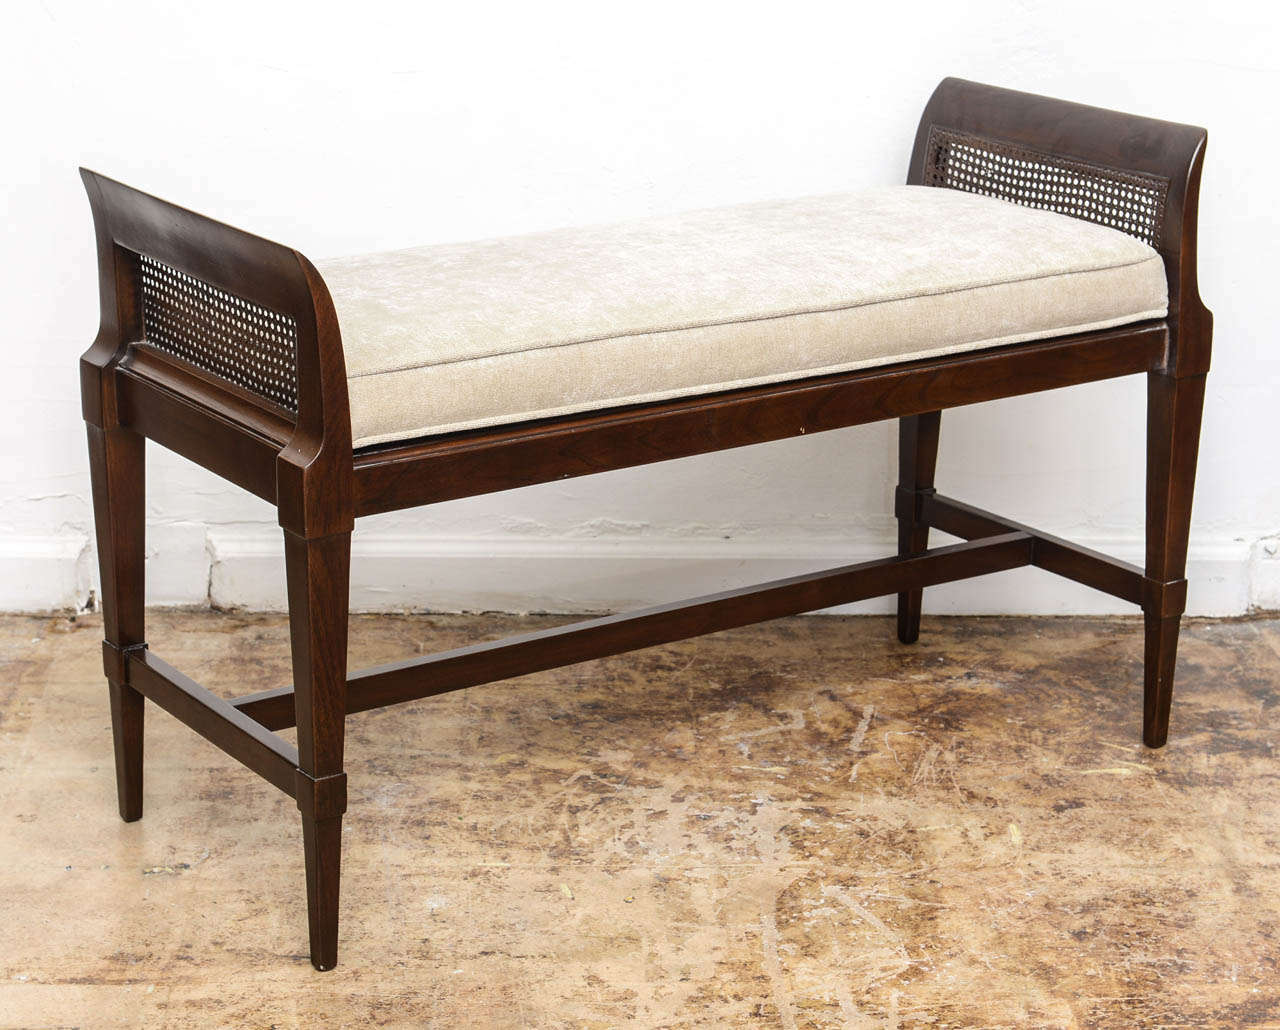 Neoclassical Revival Chic Classic Caned Sides Bench